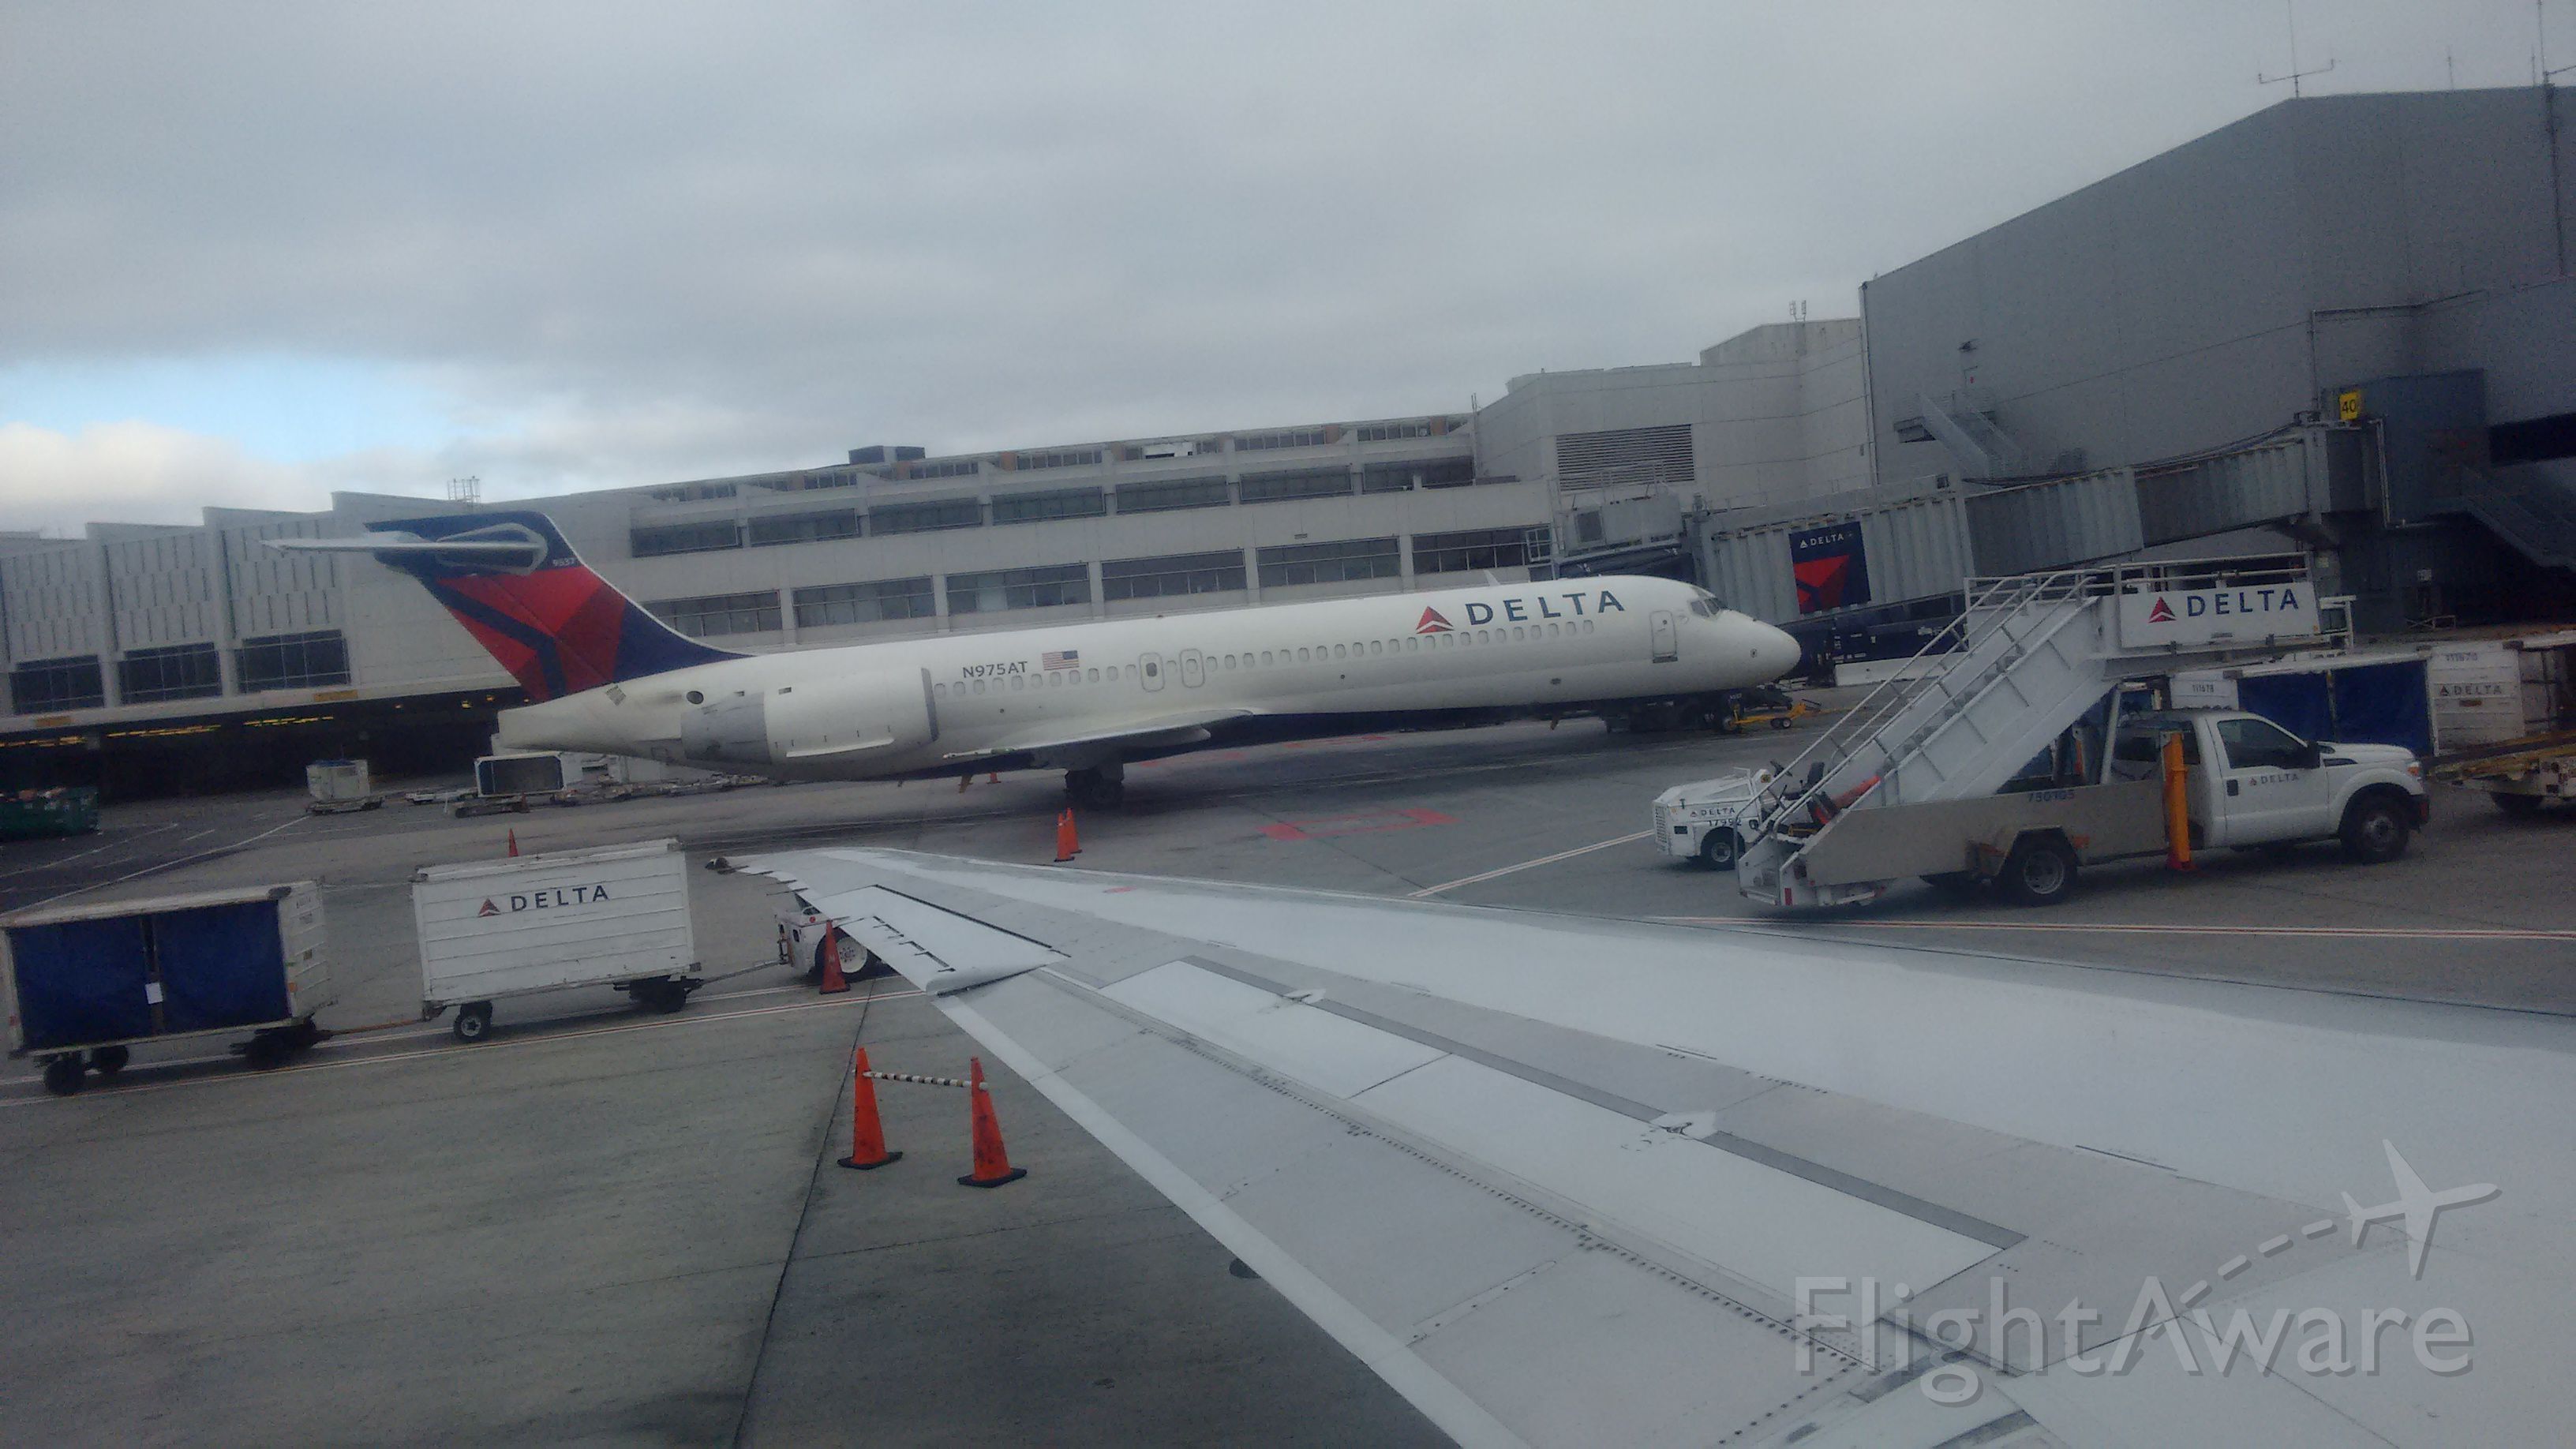 Boeing 717-200 (N975AT) - Seen at gate 40 of the C concourse at SFO. This plane was serving as a delta shuttle with service to LAX. Picture taken from MD-90